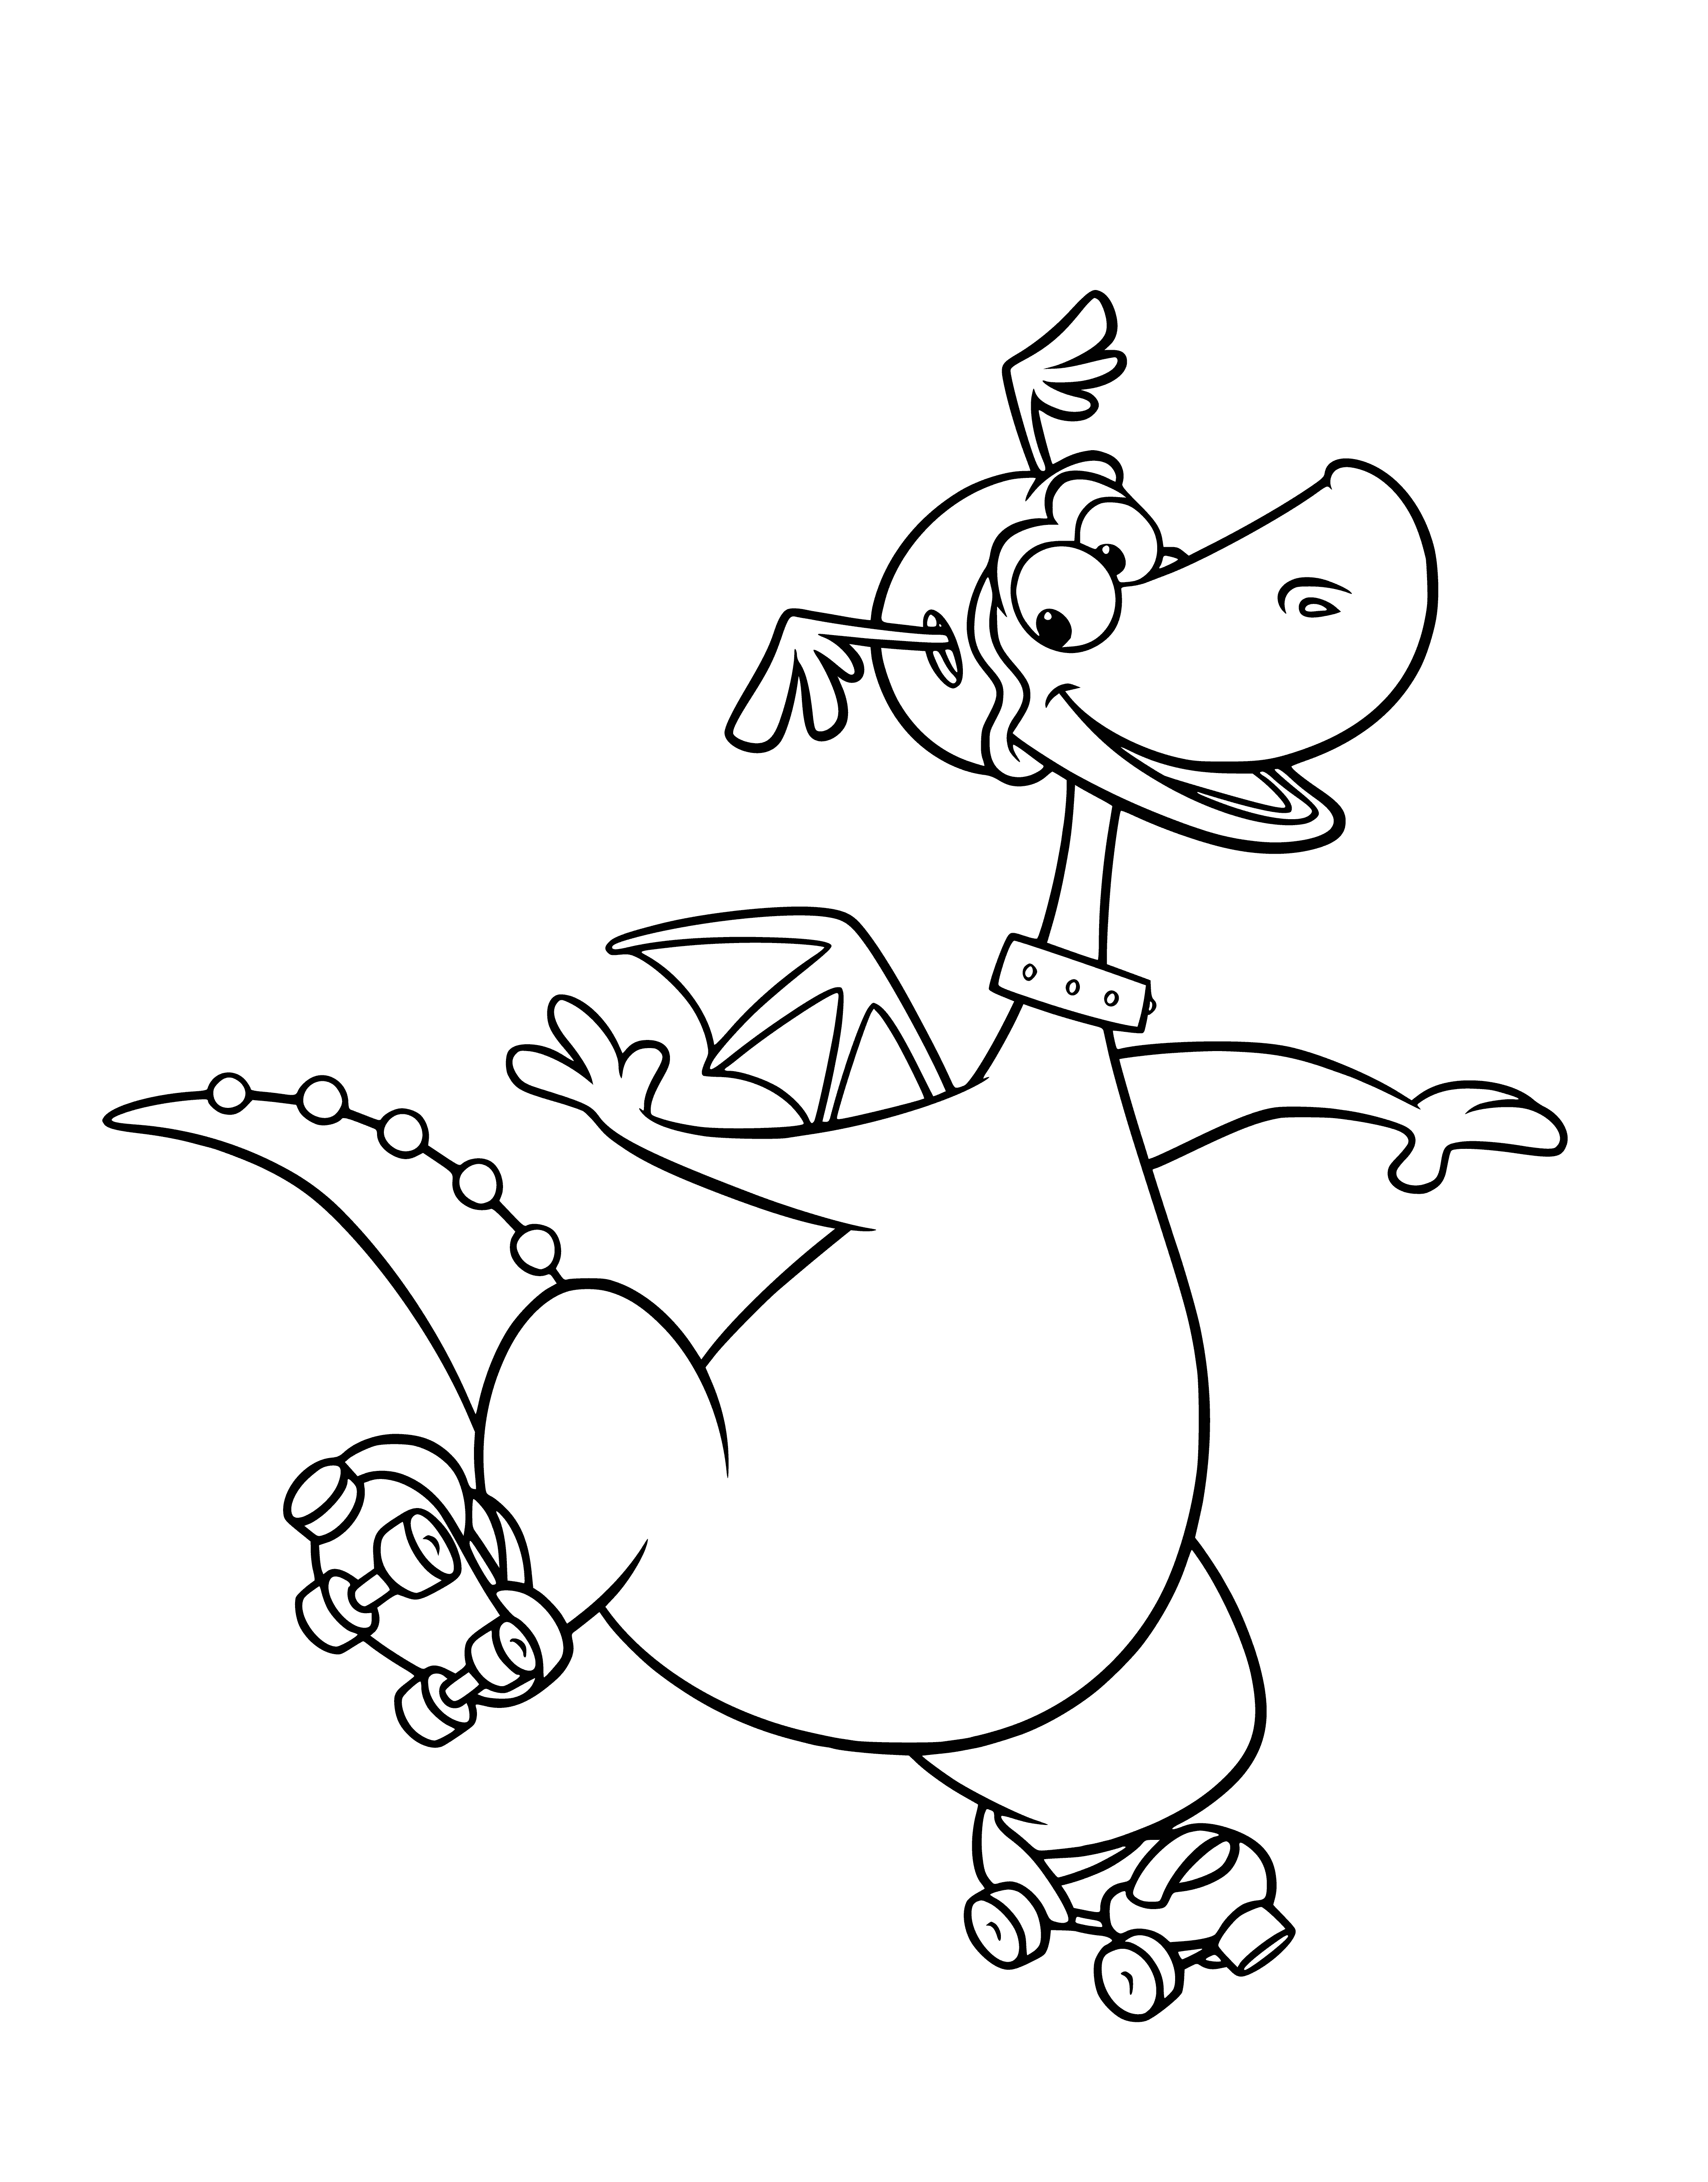 Dragon Staffi on rollers coloring page